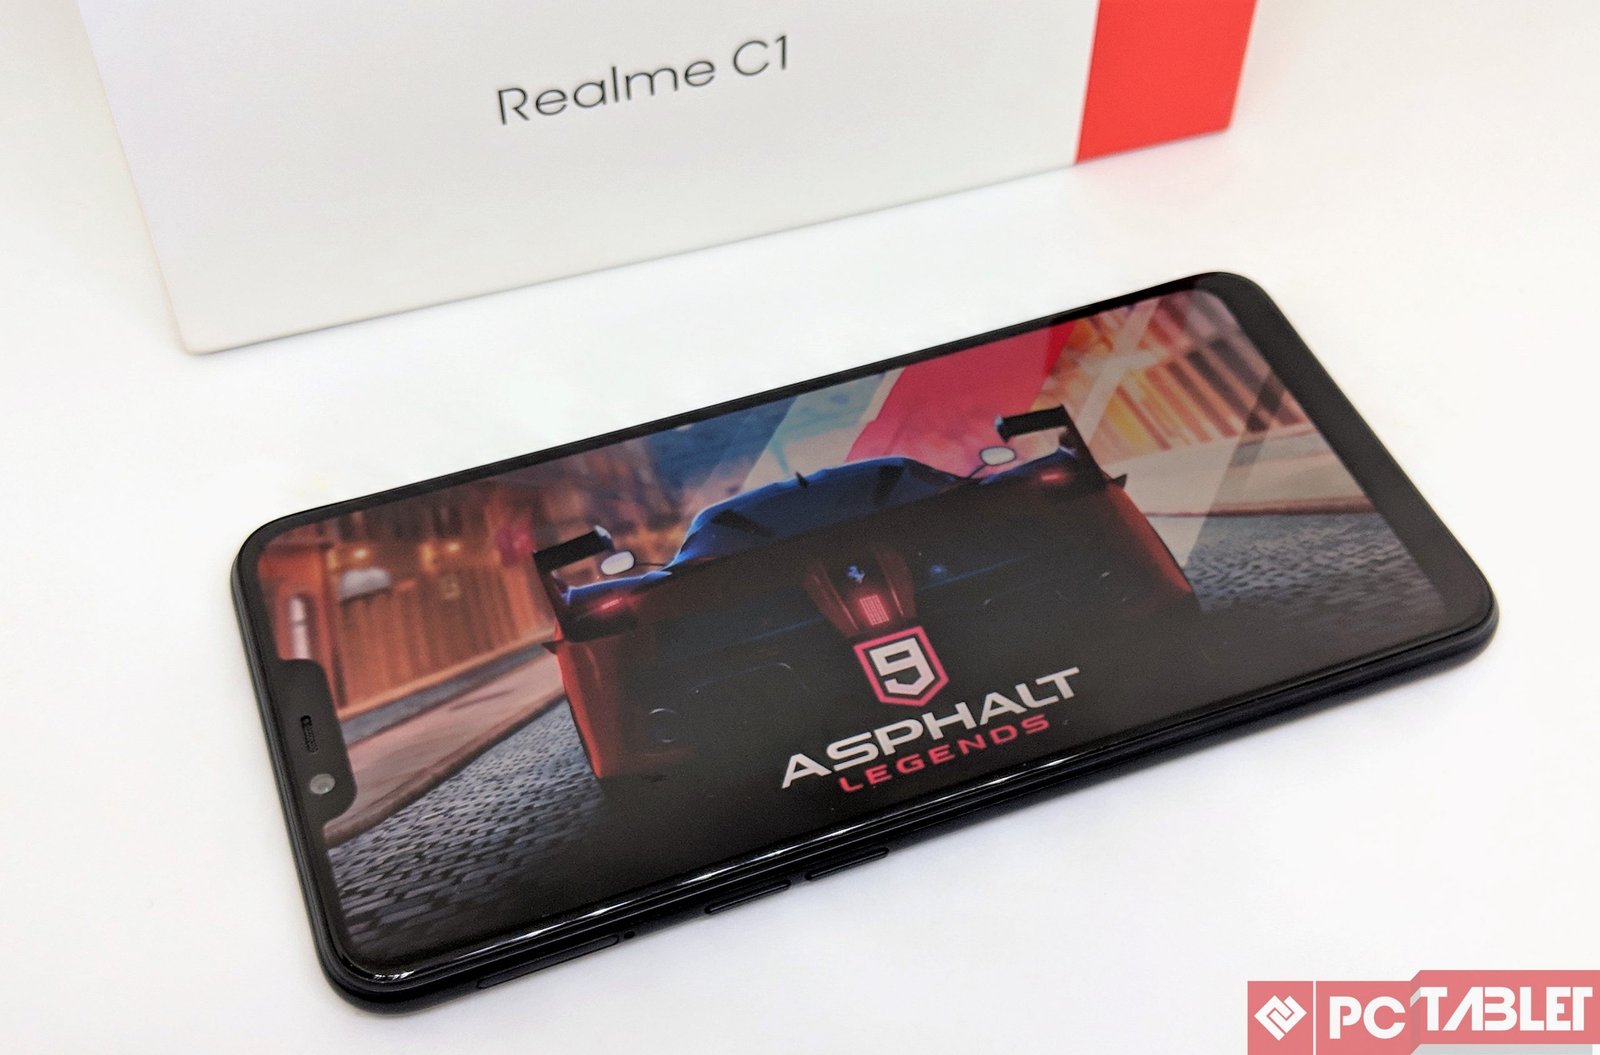 Realme C1 Gaming marked scaled